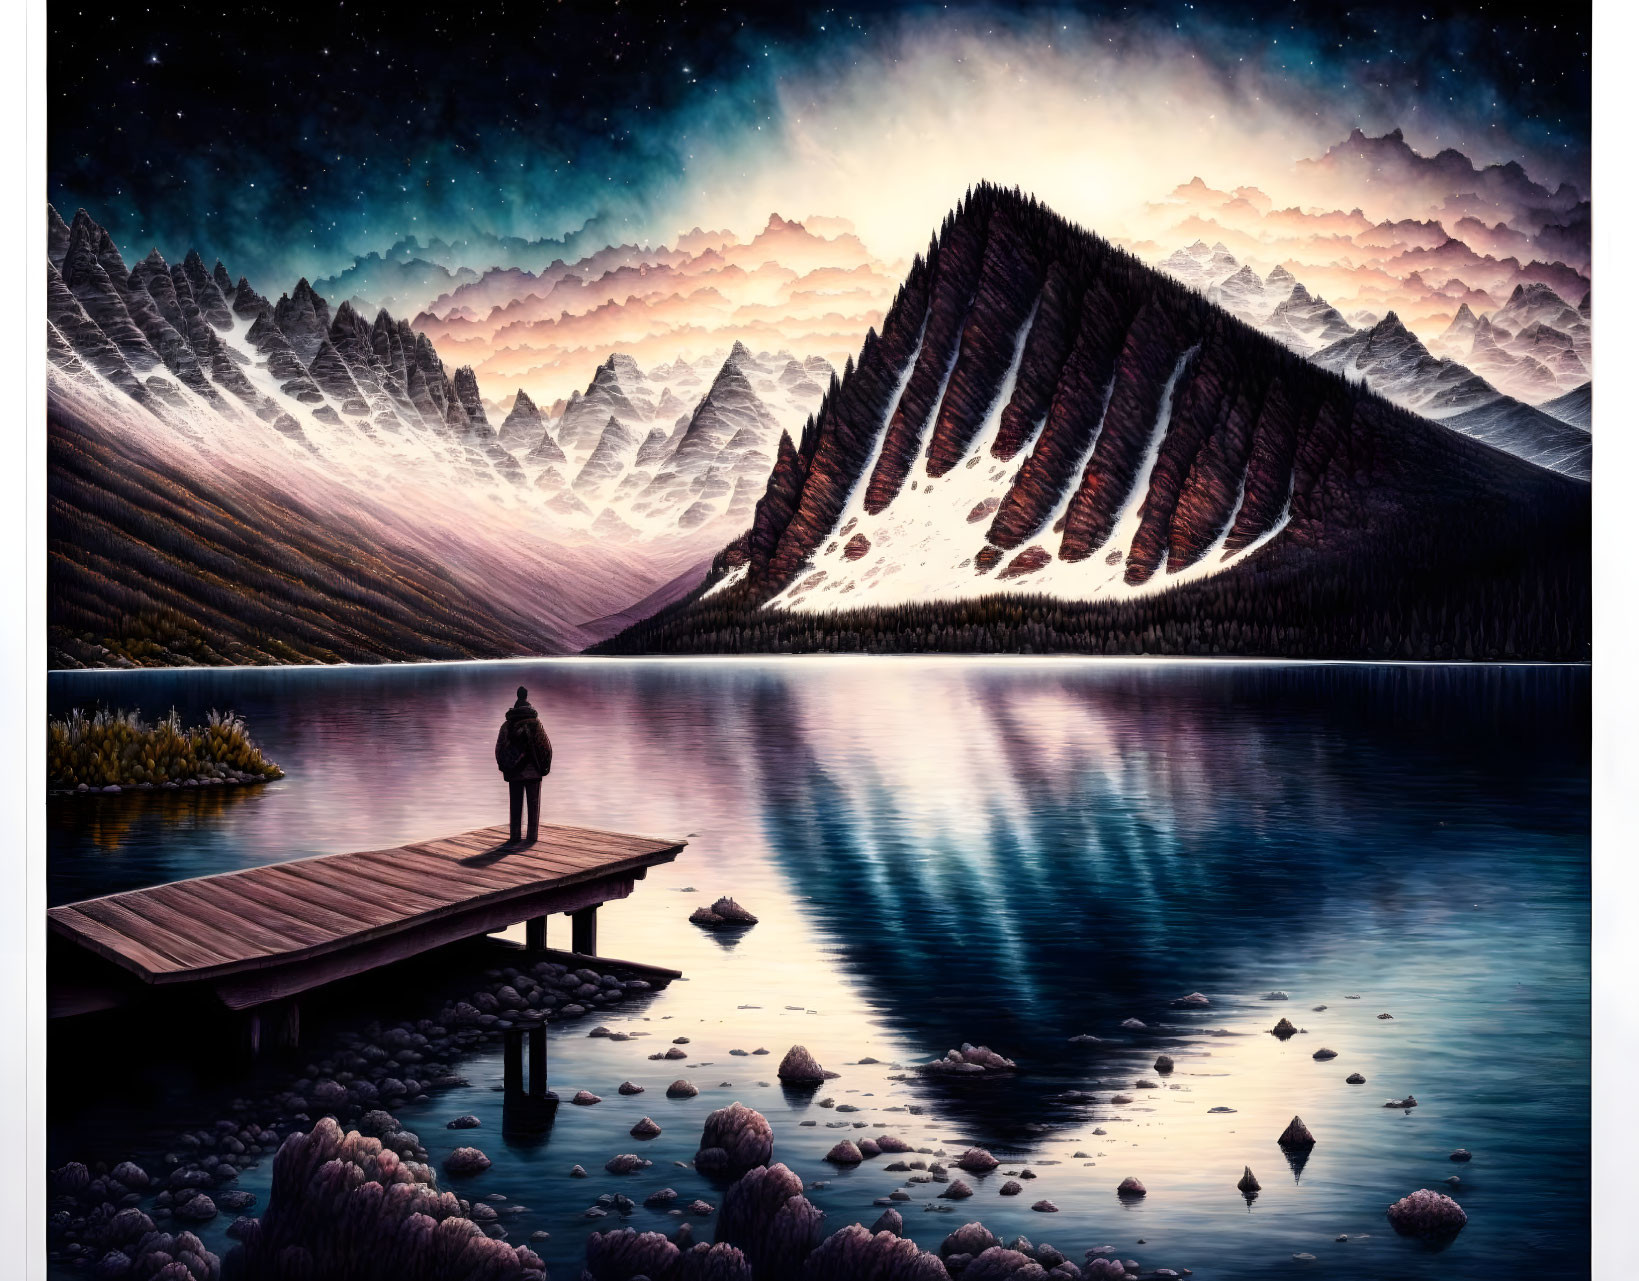 Person on Wooden Dock Gazes at Mountain Range by Tranquil Lake